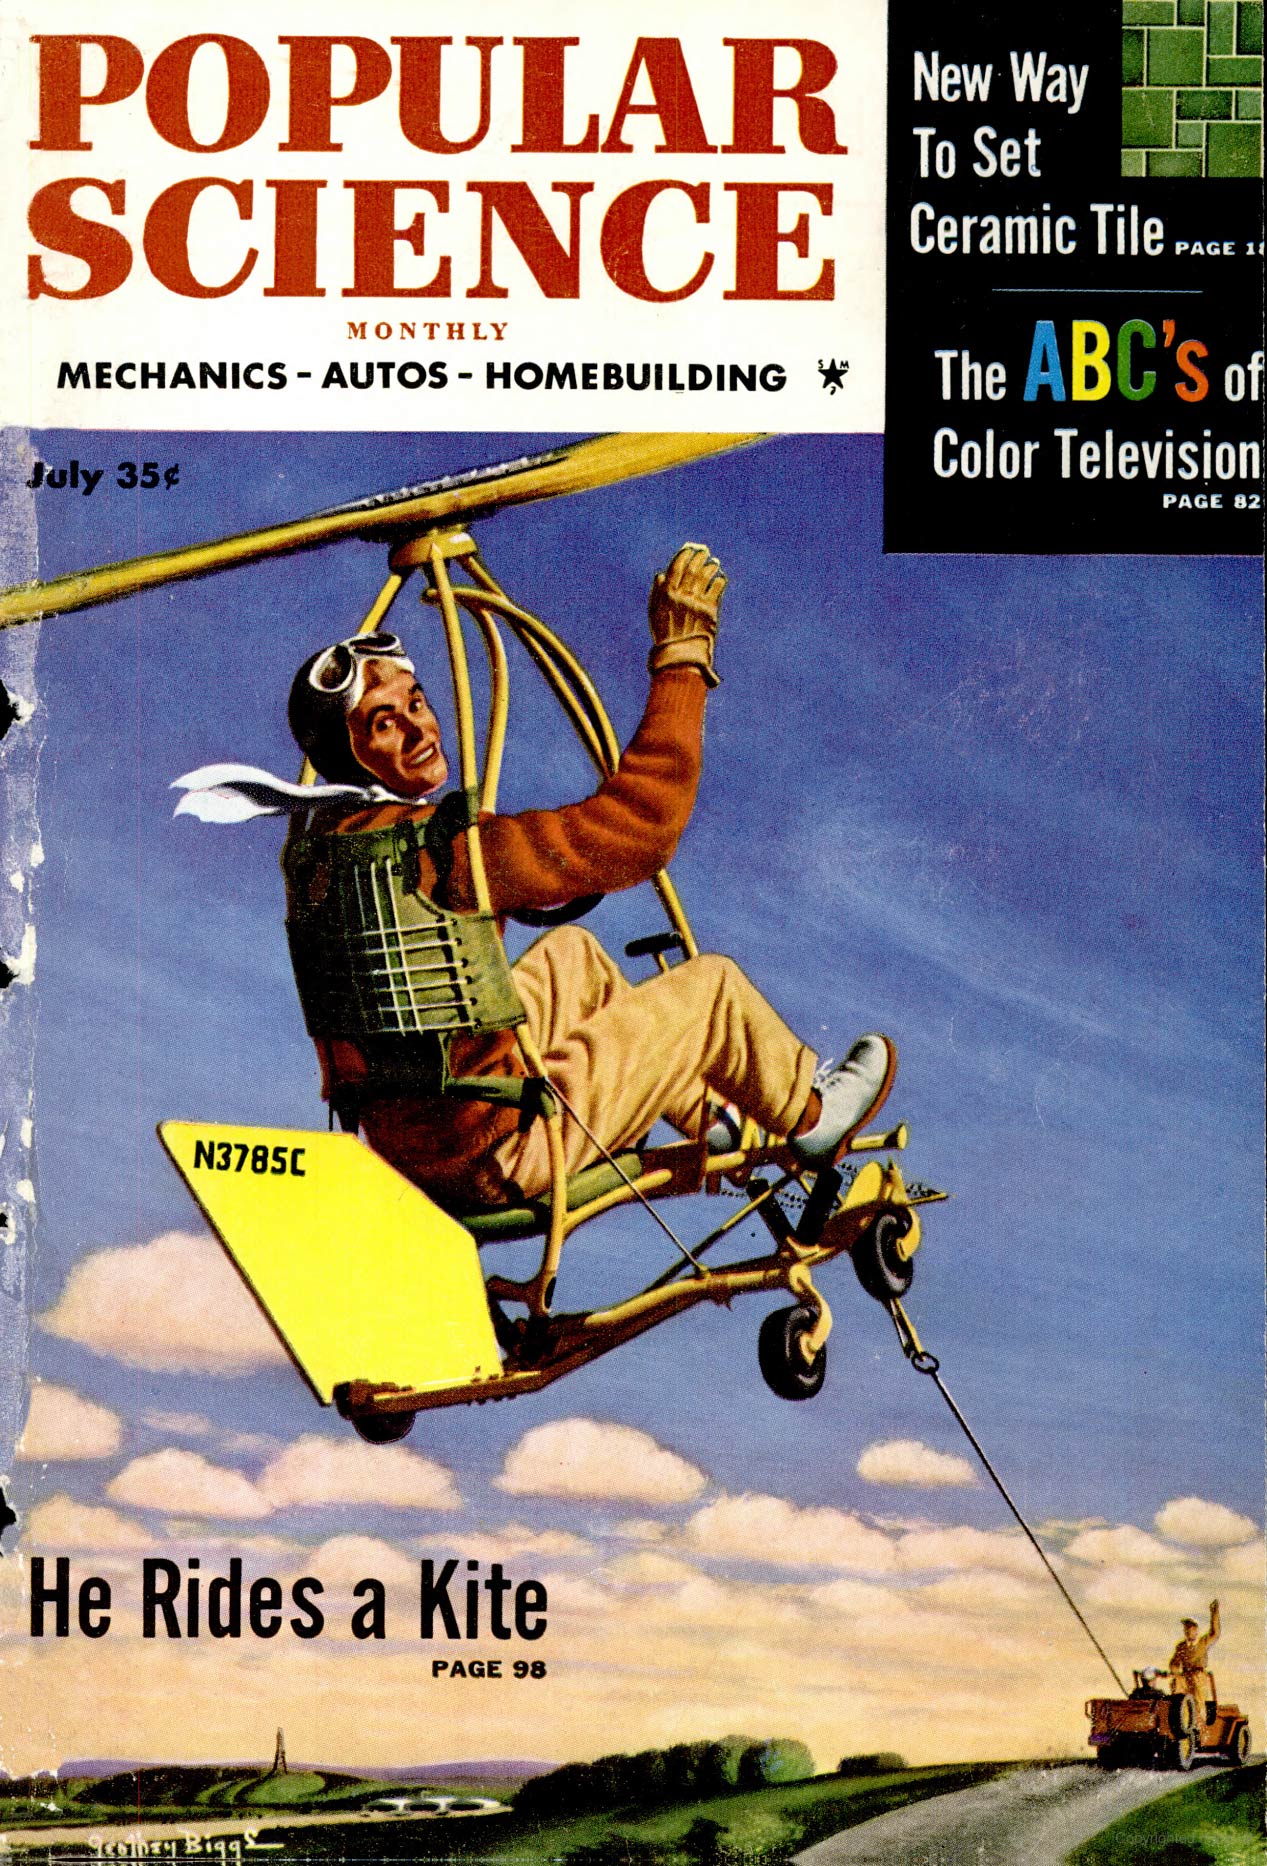 July 1954 cover of Popular Science magazine has man on personal flying gadget